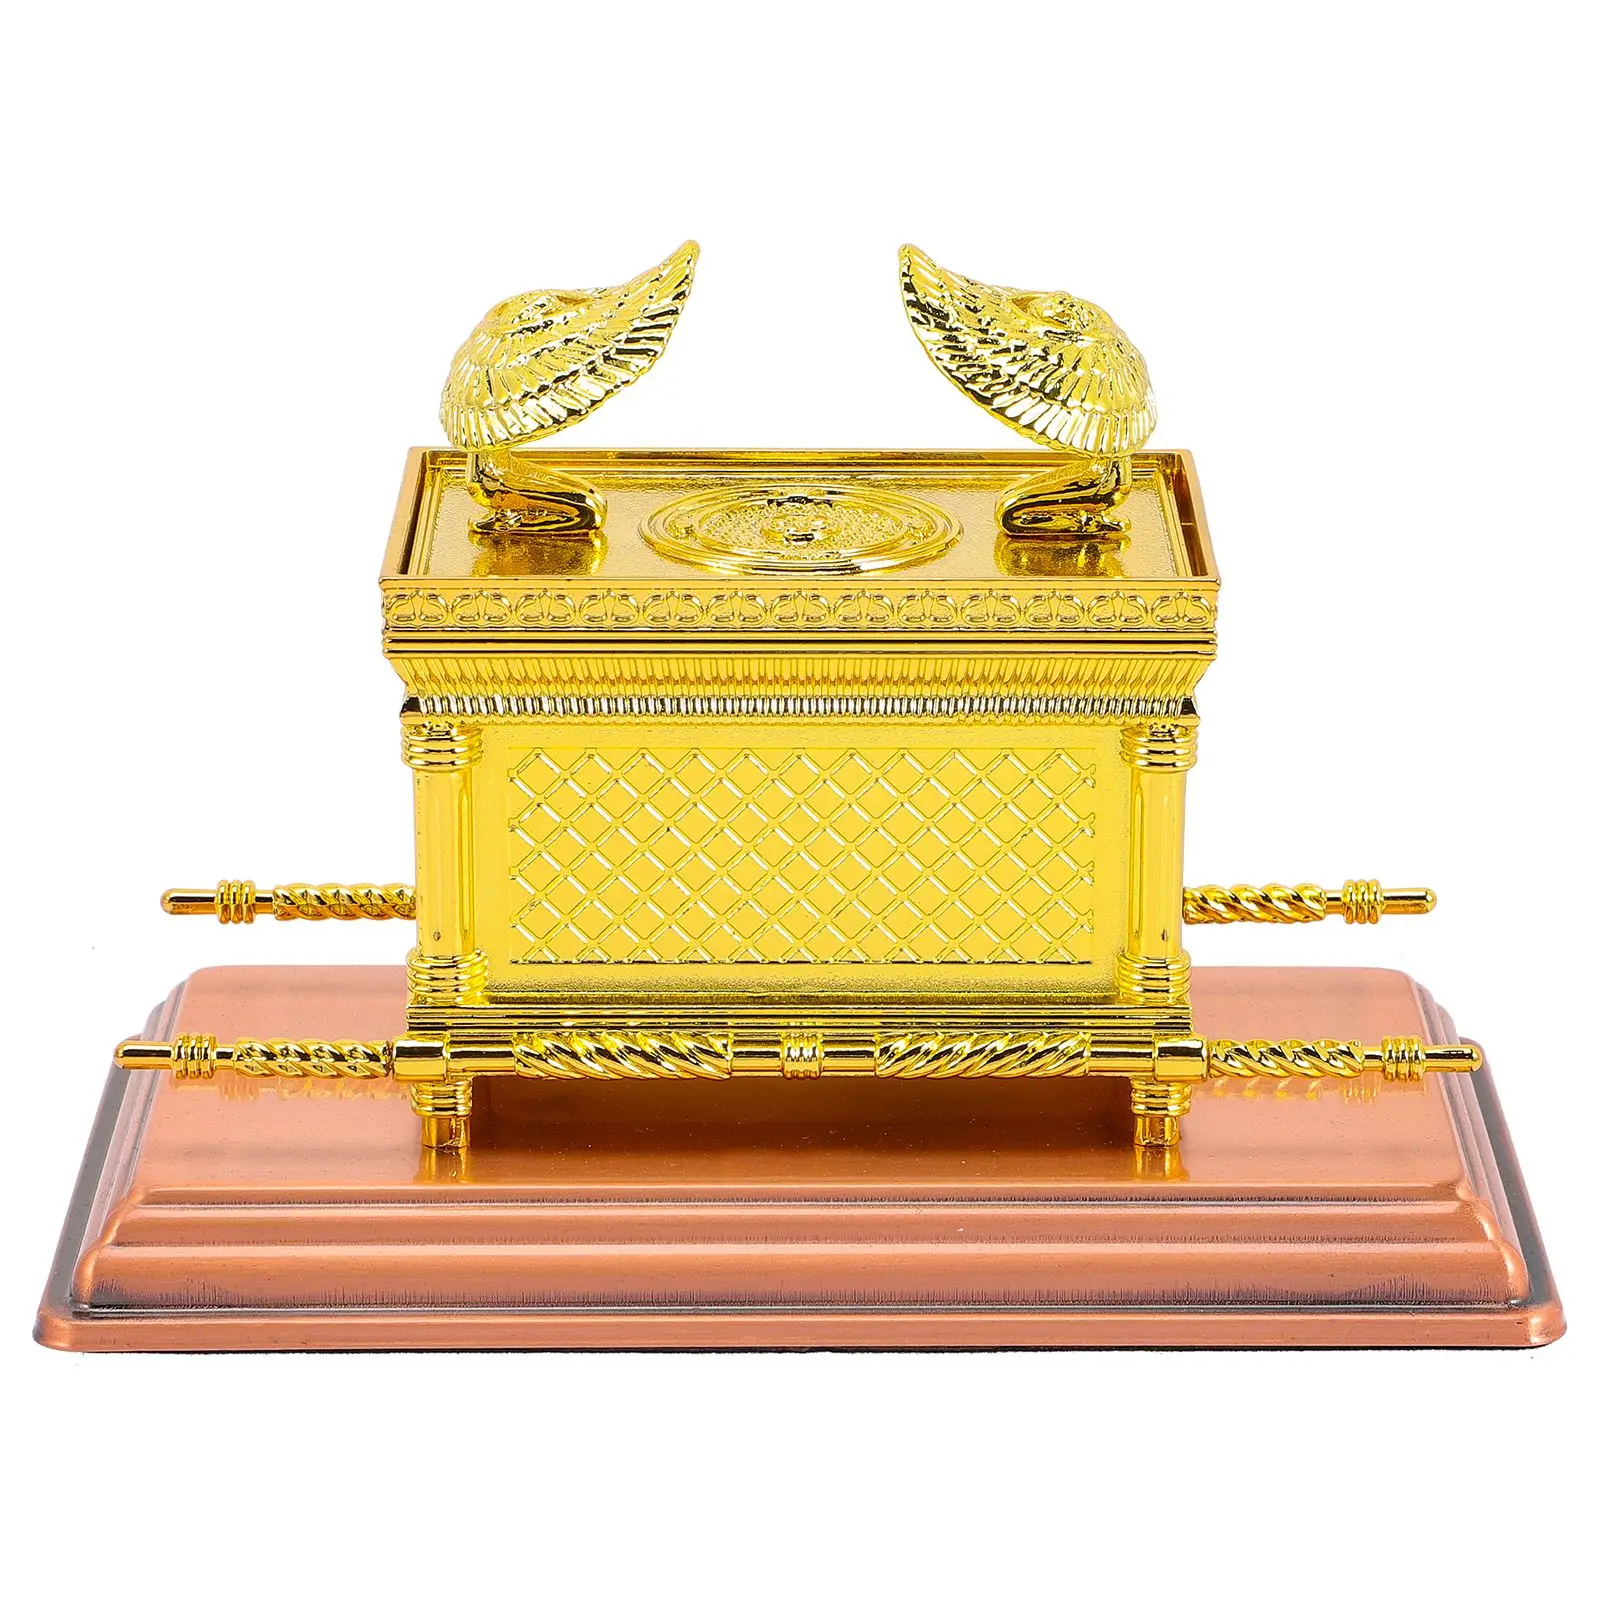 

Classical Exquisite Portable Alloy Ornament The Ark Of The Covenant Model Religious Ornament for Gift Option